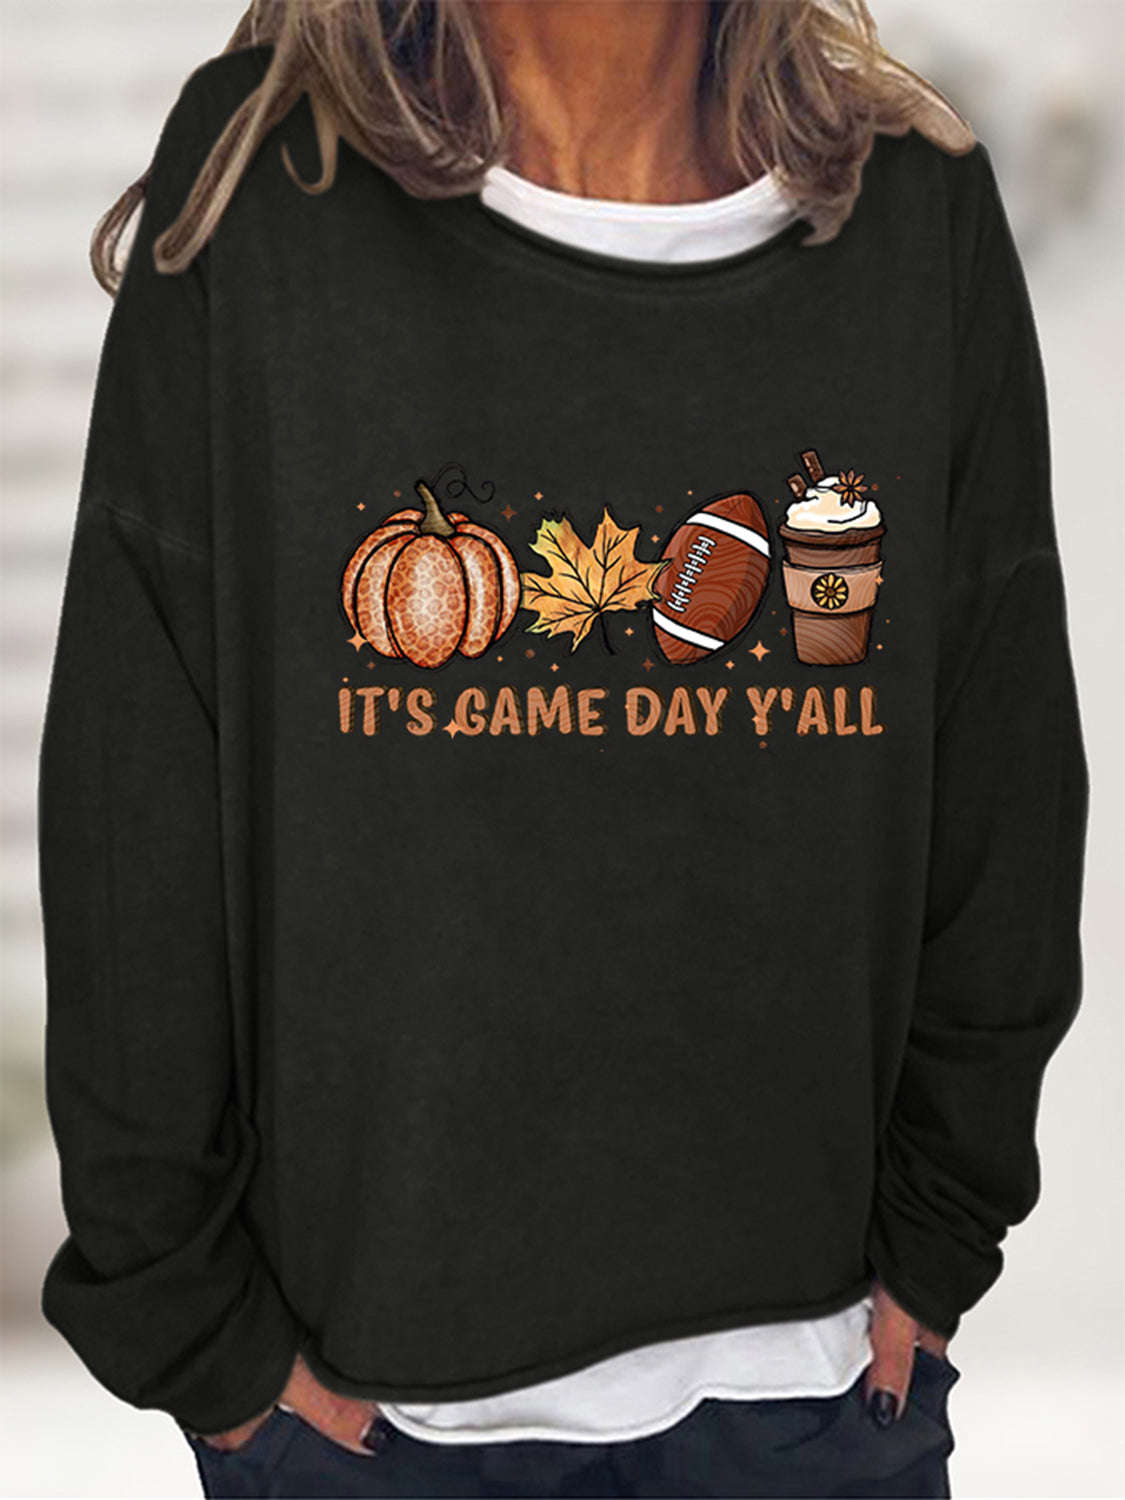 Full Size IT'S GAME DAY Y'ALL Graphic Sweatshirt (5 Colors)  Krazy Heart Designs Boutique Black S 